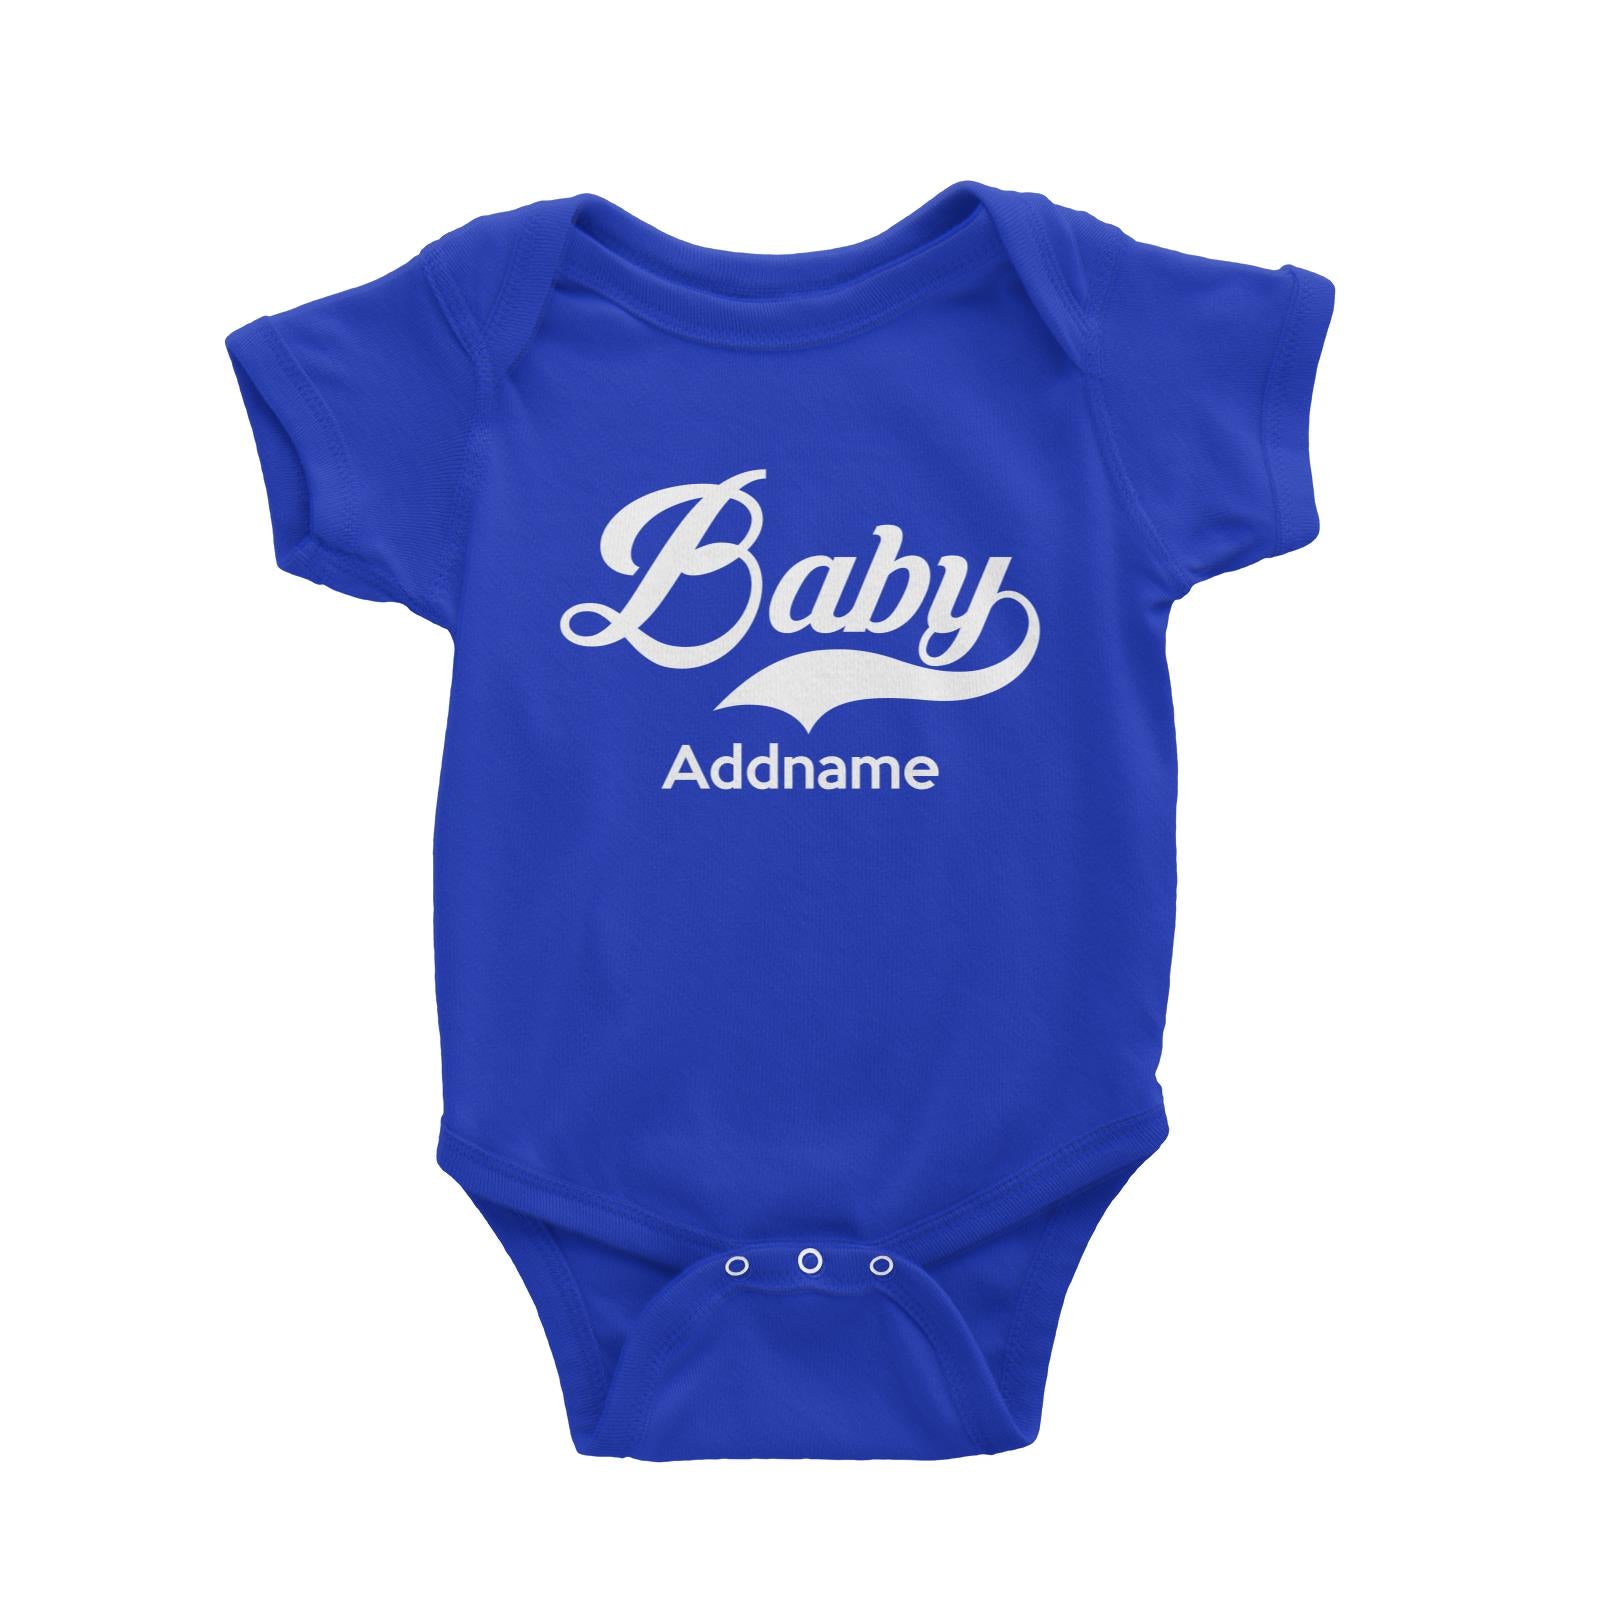 Retro Baby Addname Baby Romper  Matching Family Personalizable Designs